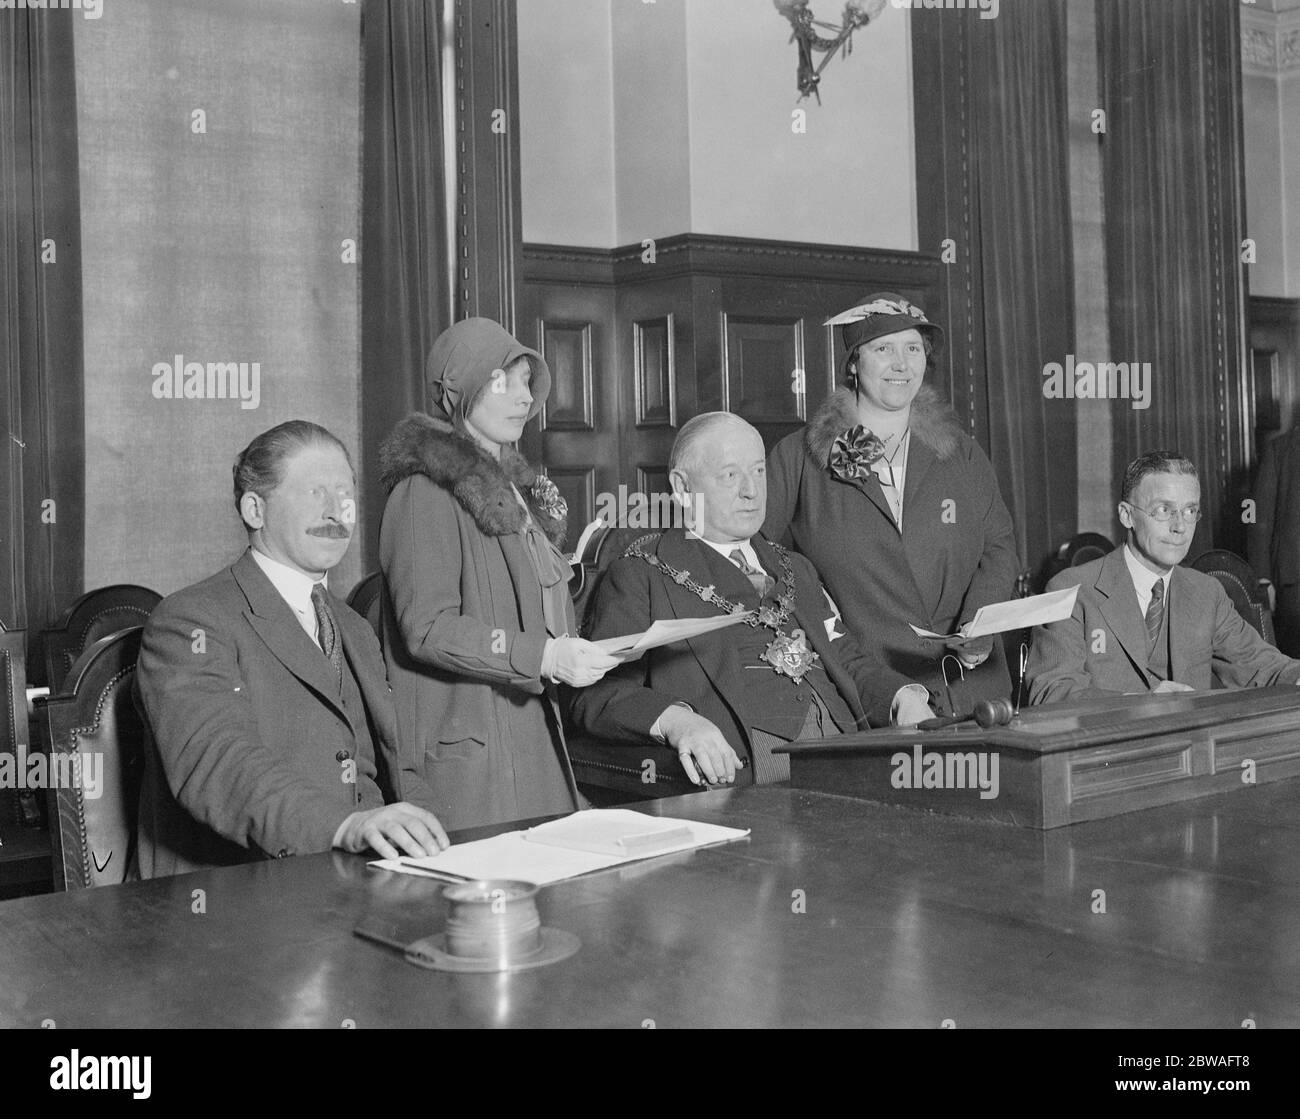 General Election 1931 Miss Thelma Cazalet and Mrs Manning Handing in their nomination papers to the Mayor of Islington , Alderman F L Sareant 16 October 1931 Stock Photo